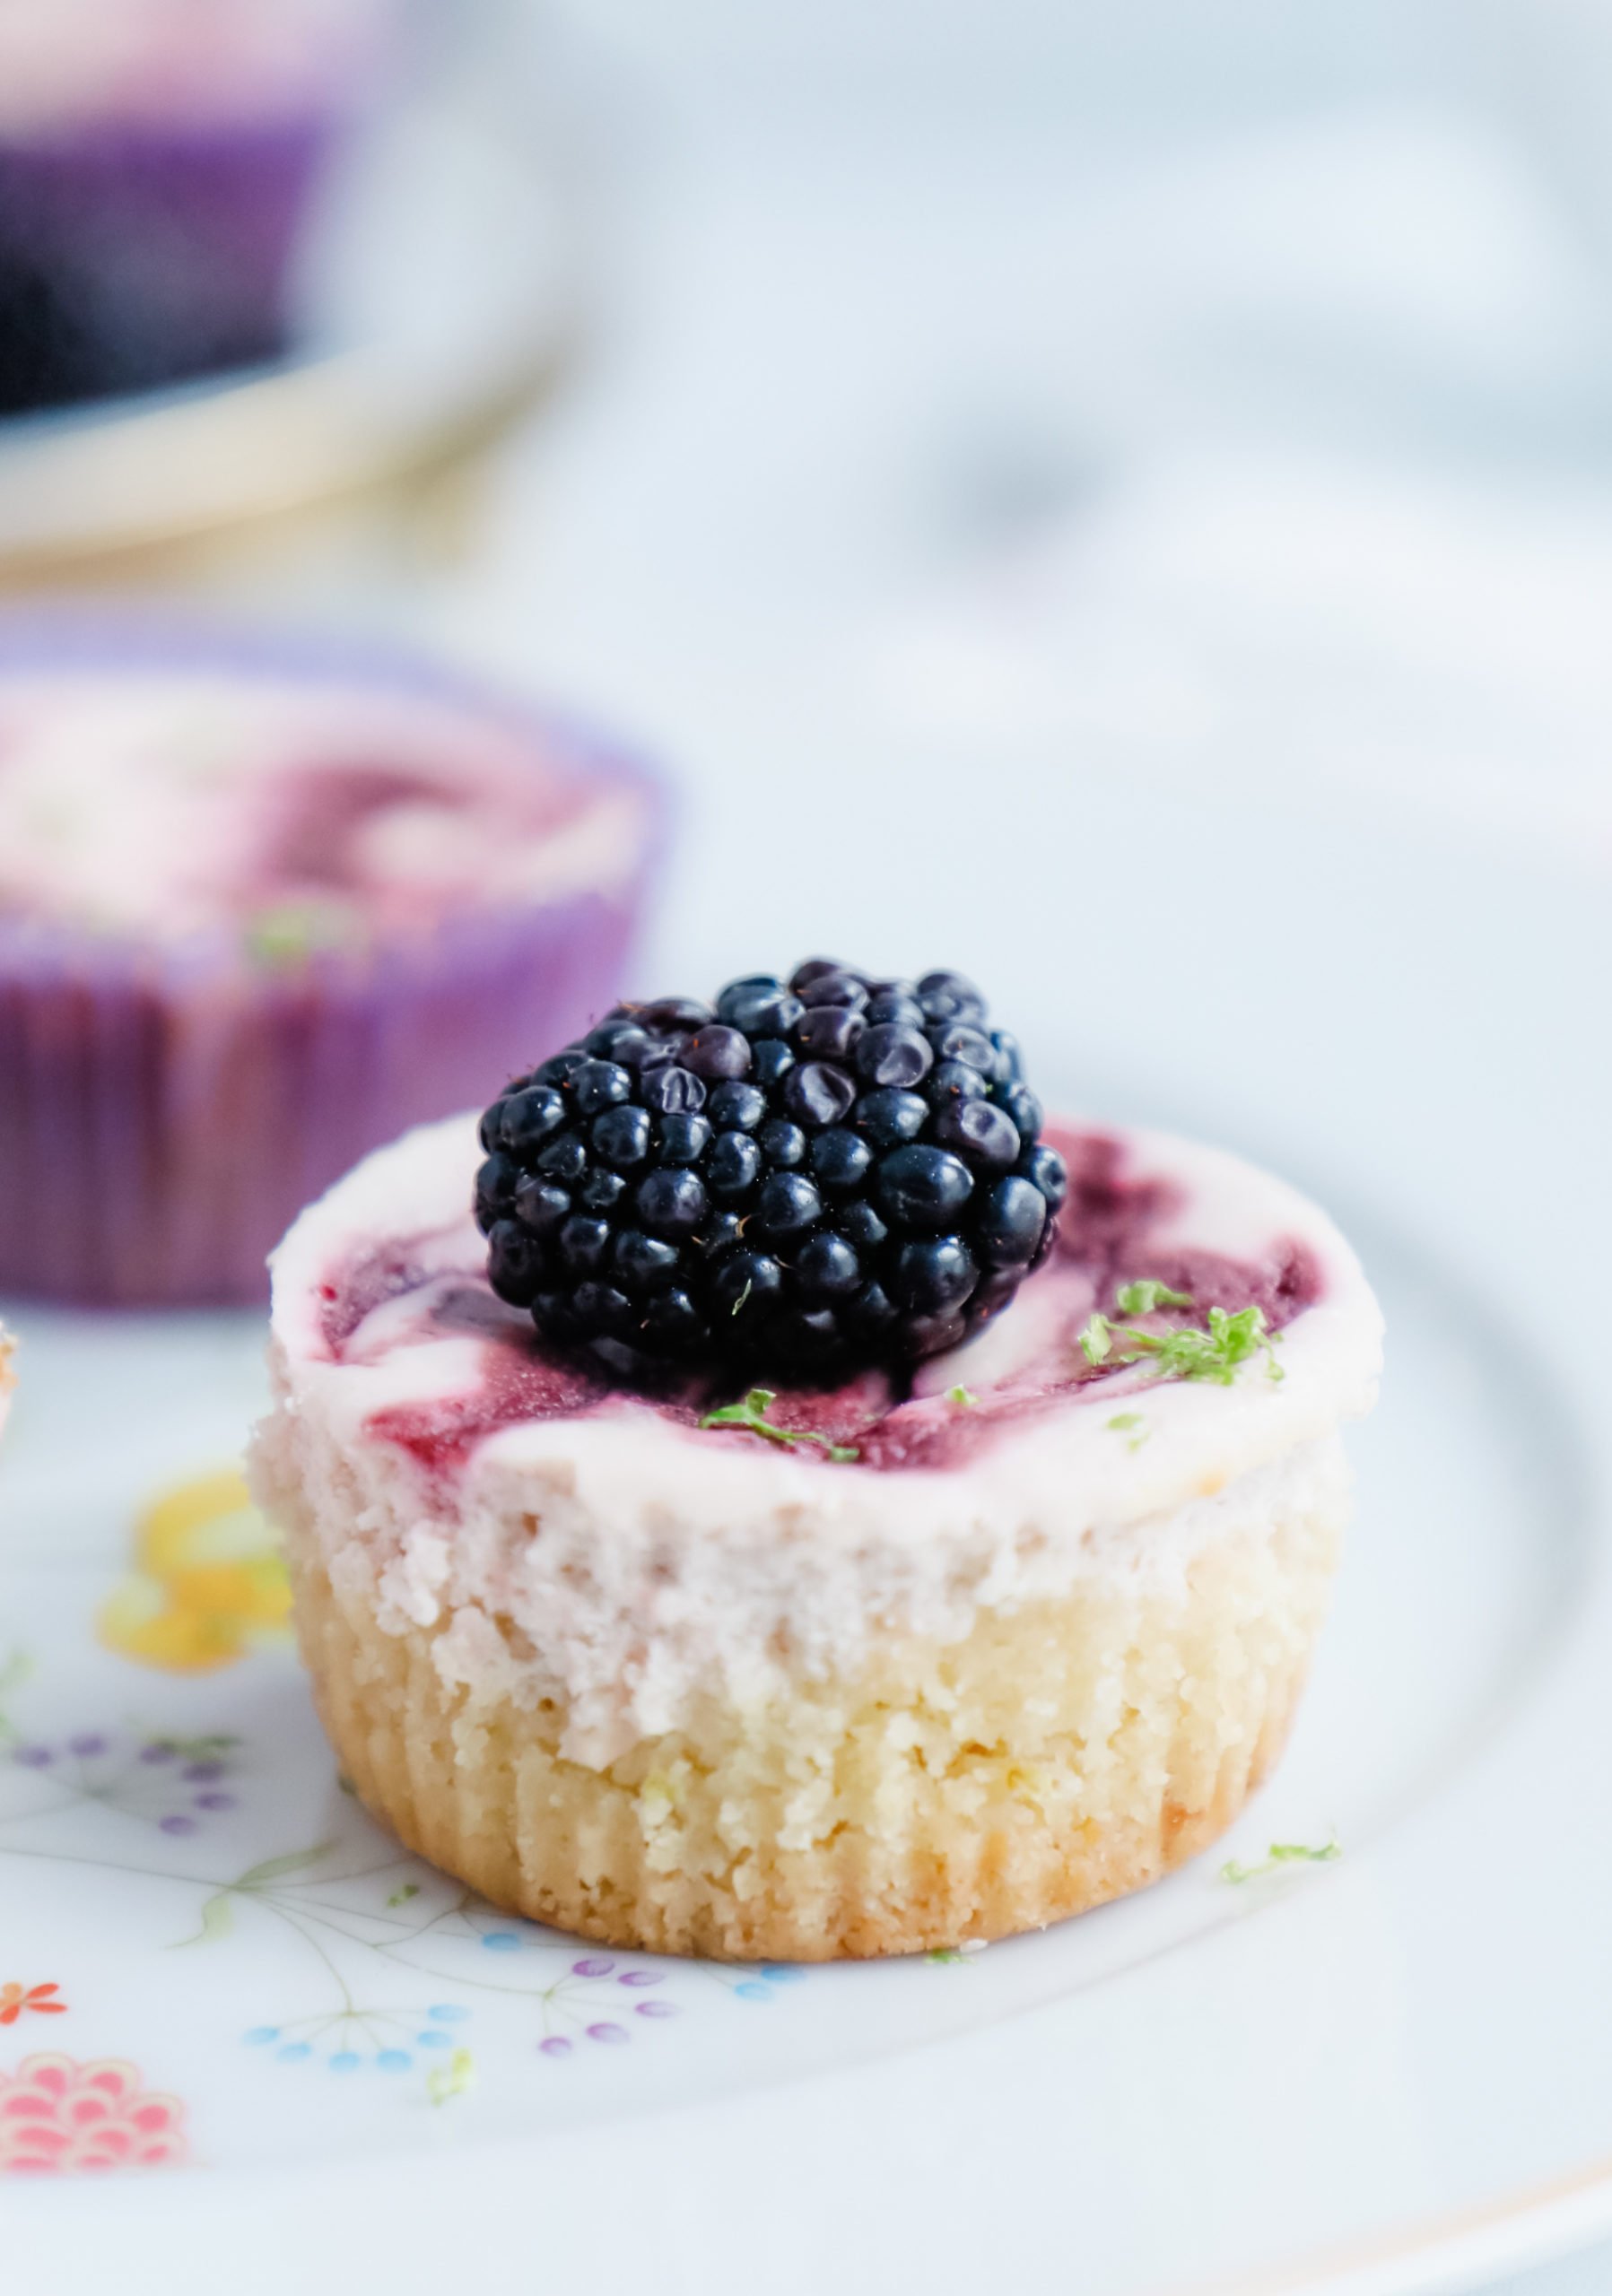 Closeup of a single blackberry lime cheesecake with a blackberry on top